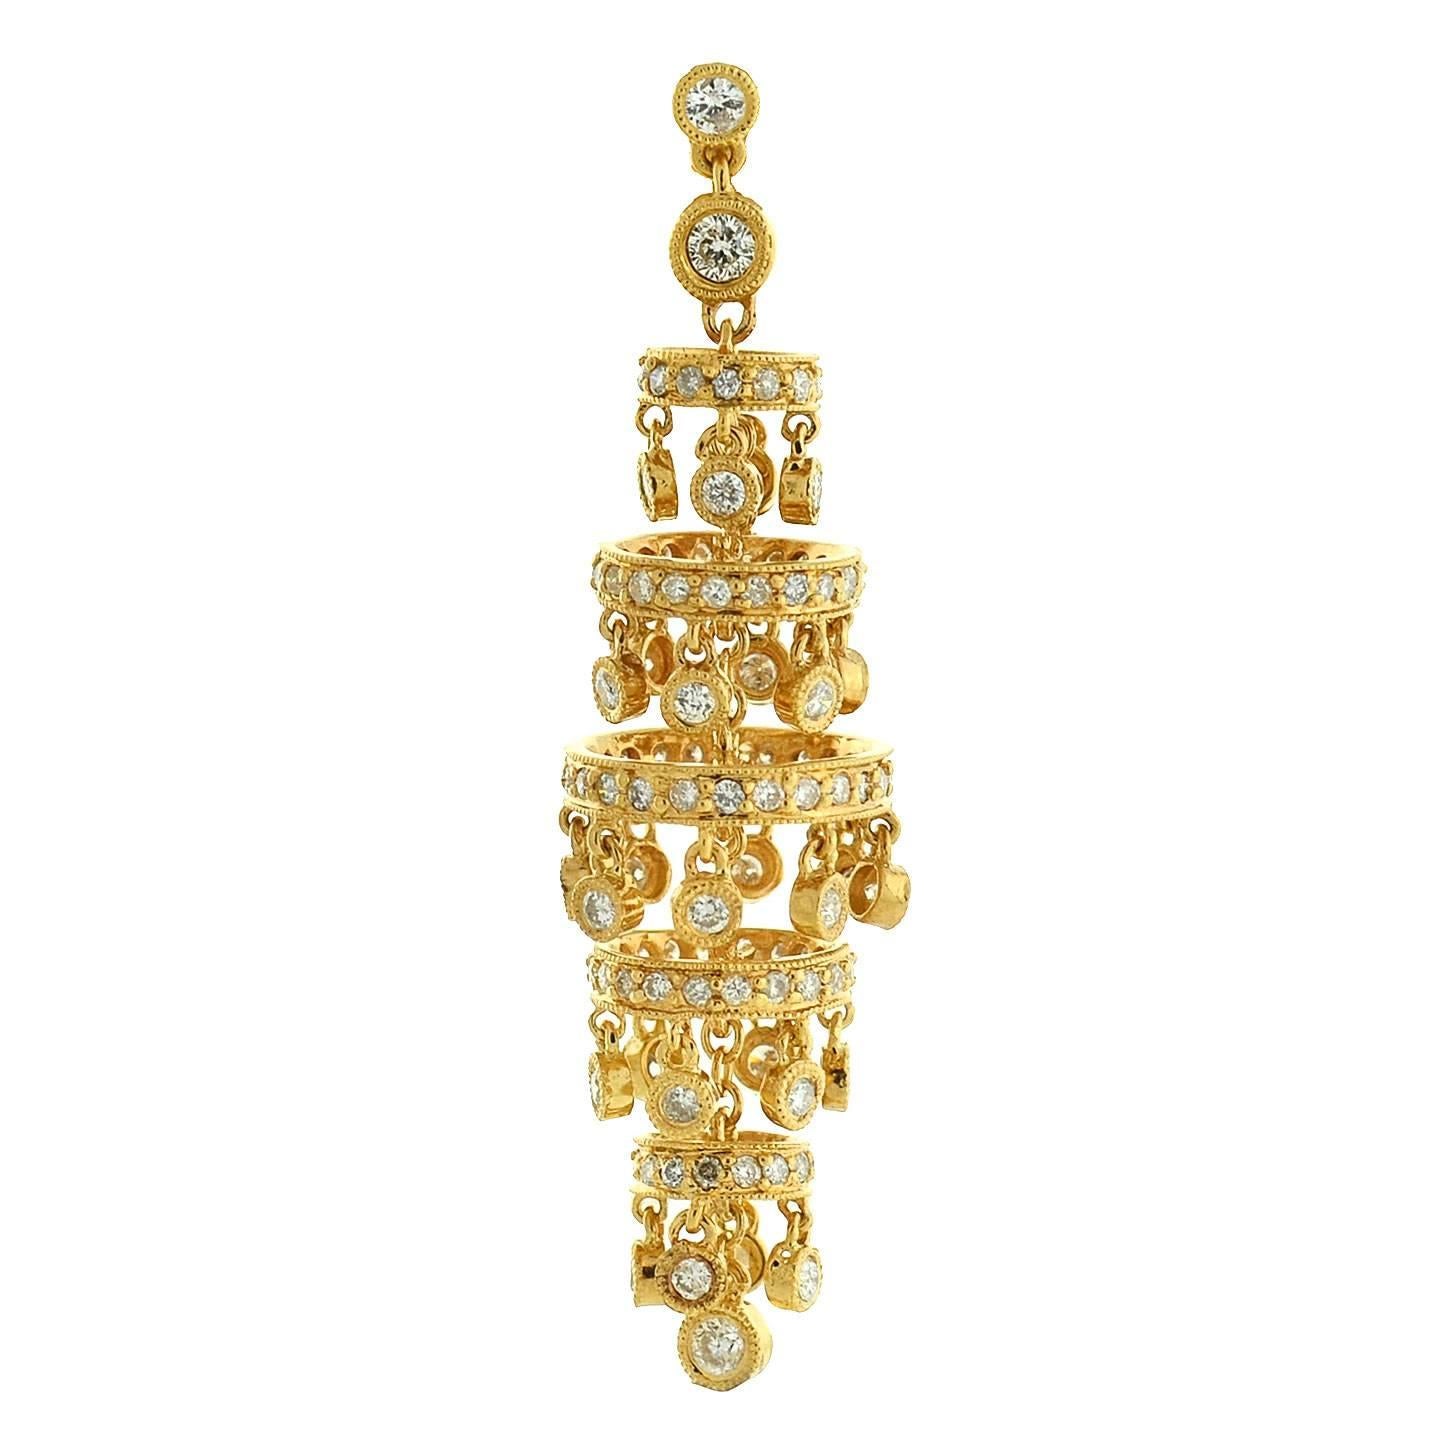 These incredible estate chandelier earrings are nothing short of spectacular! Each earring is crafted in vibrant 18kt gold, and has a dramatic tiered design. The chandelier design is comprised of 5 